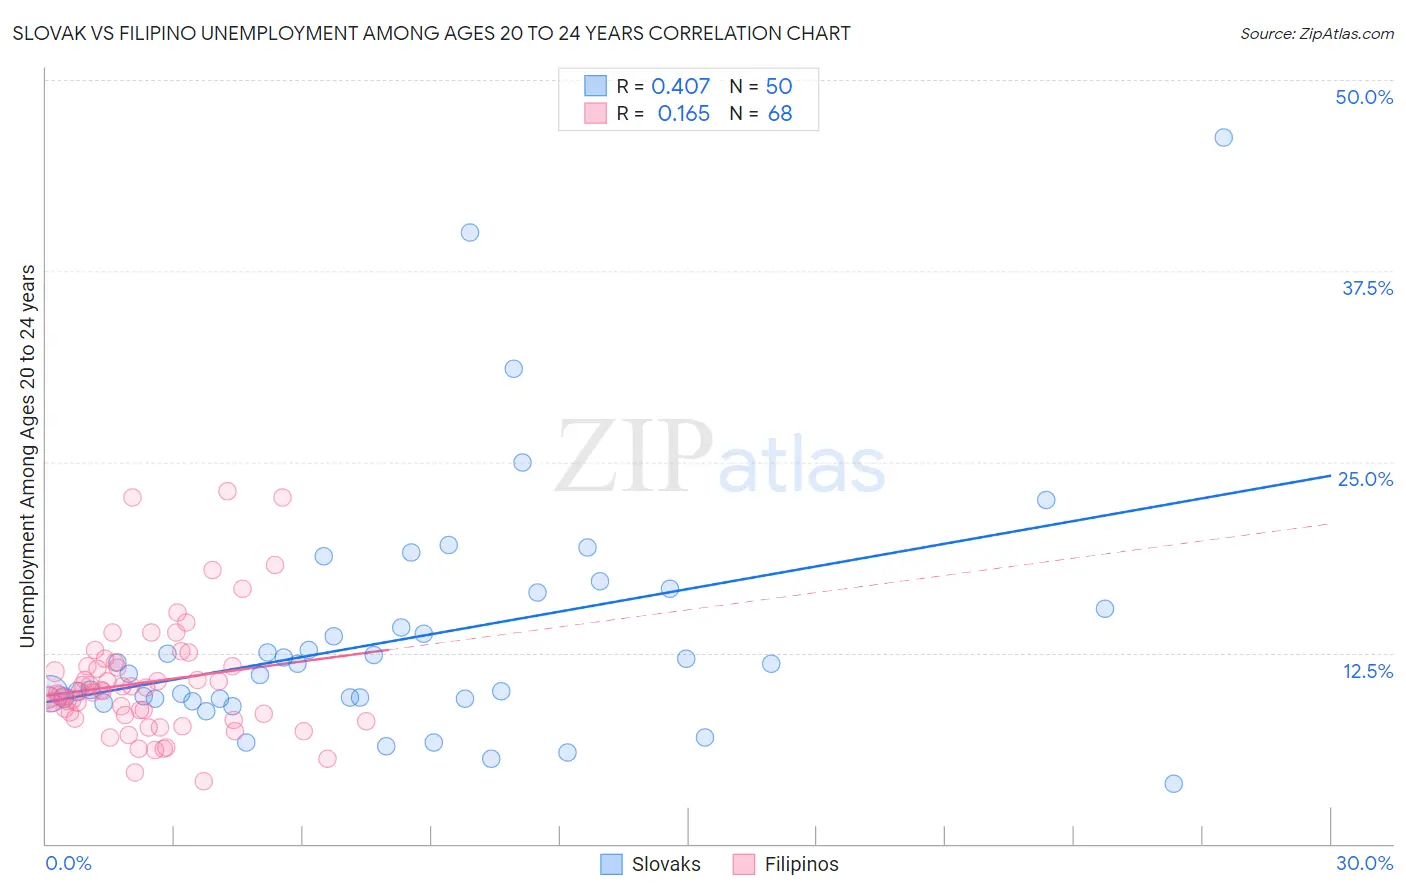 Slovak vs Filipino Unemployment Among Ages 20 to 24 years